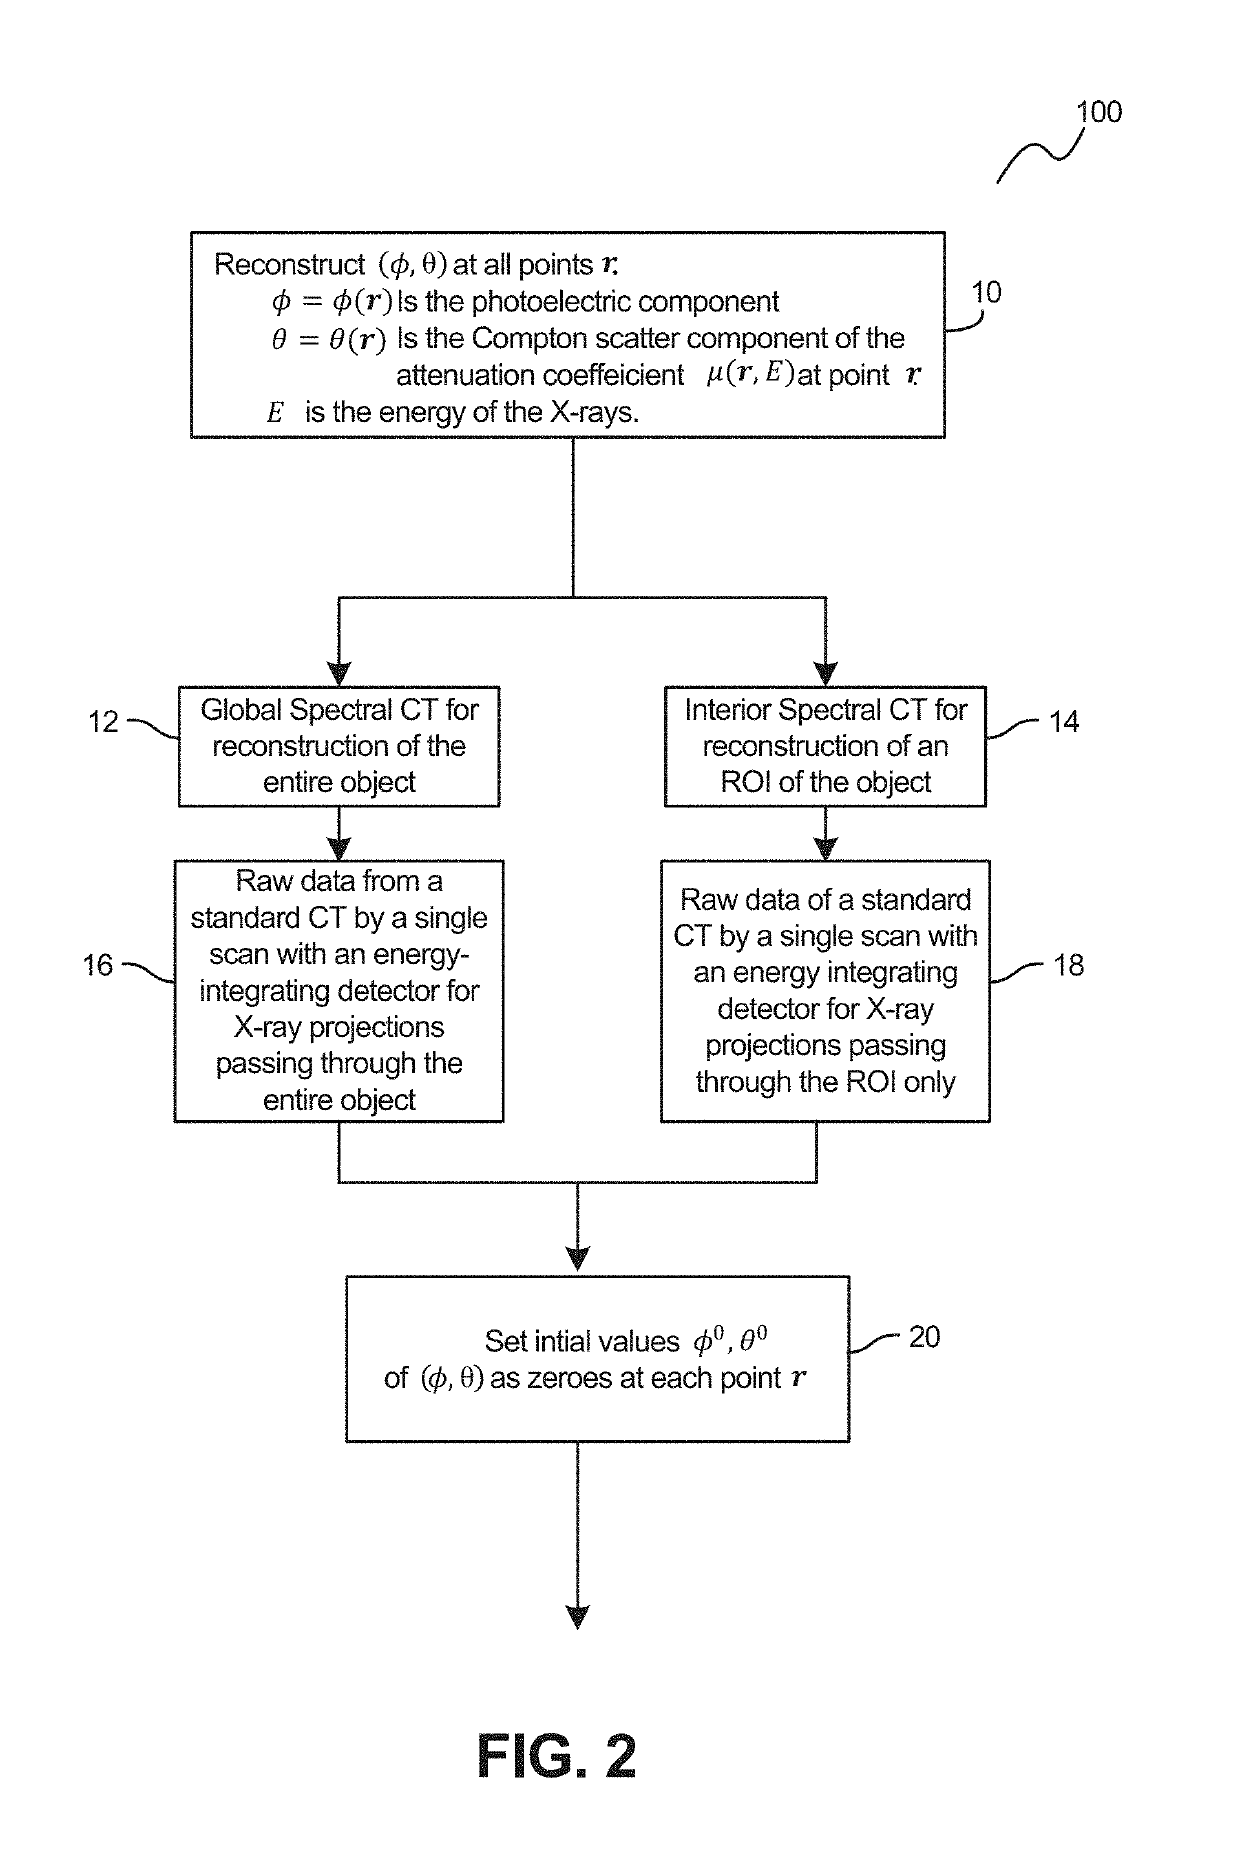 Devices, Systems and Methods Utilizing Framelet-Based Iterative Maximum-Likelihood Reconstruction Algorithms in Spectral CT